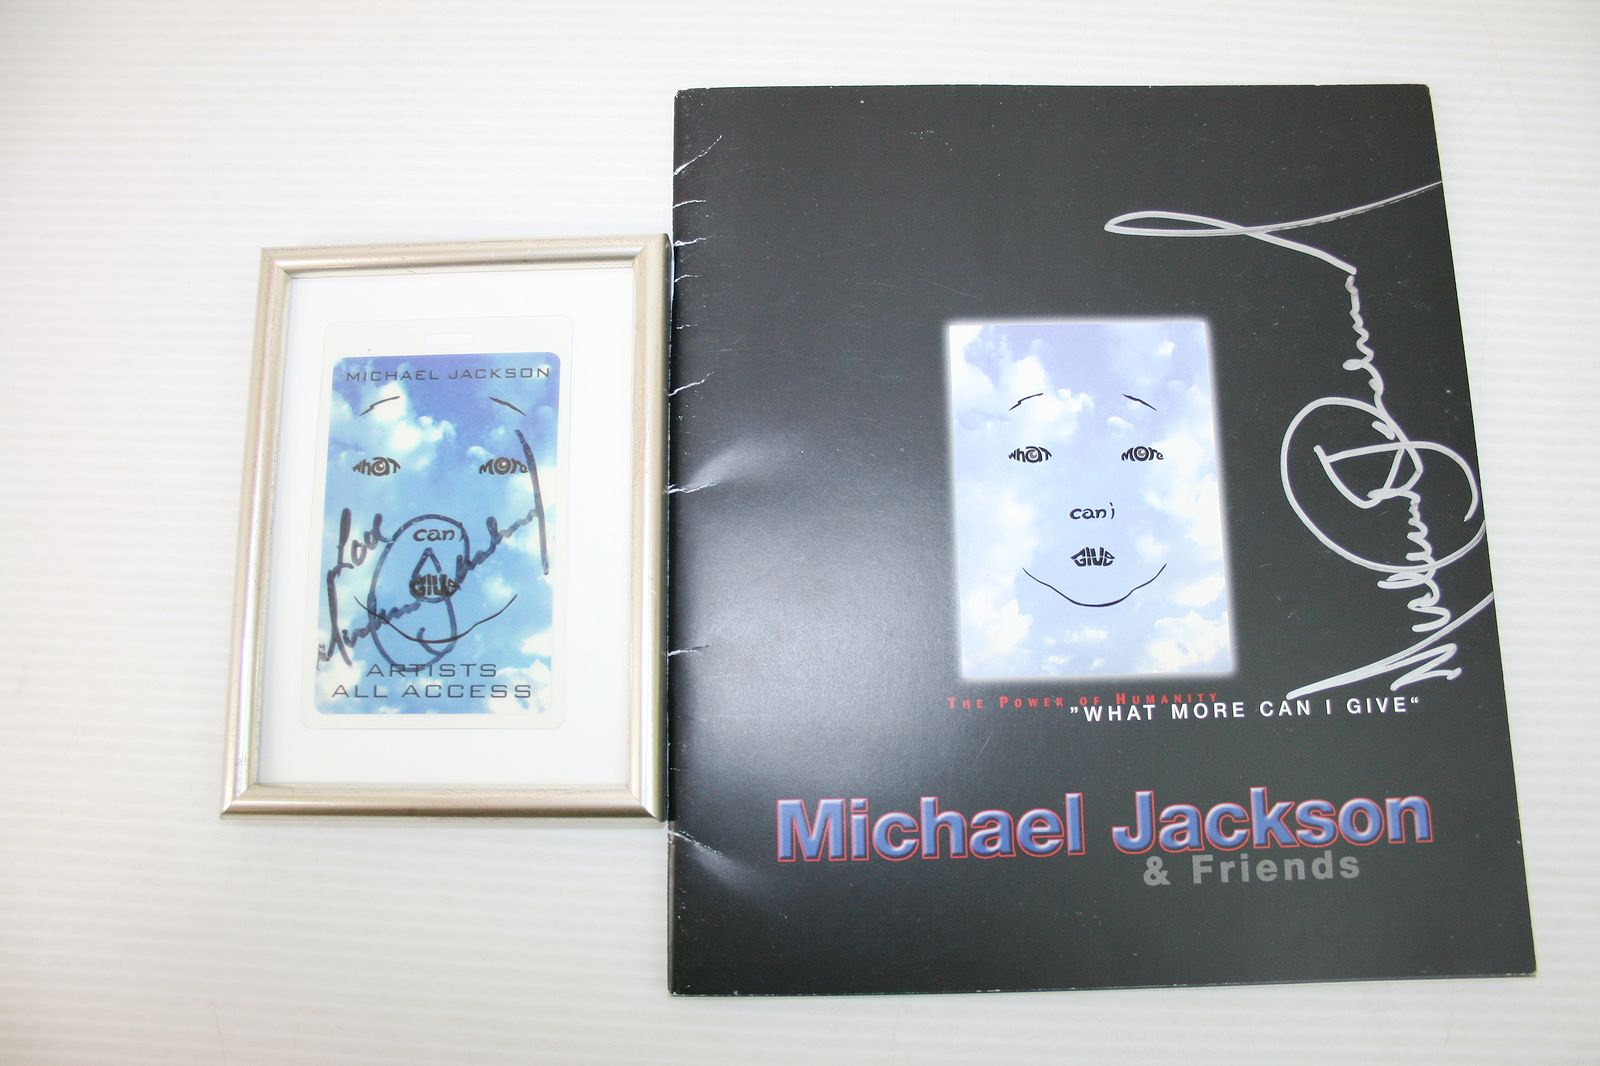 2010 Julien’s AUCTION マイケル・ジャクソン What More Can I Give サイン入りパス&サイン入りプログラム